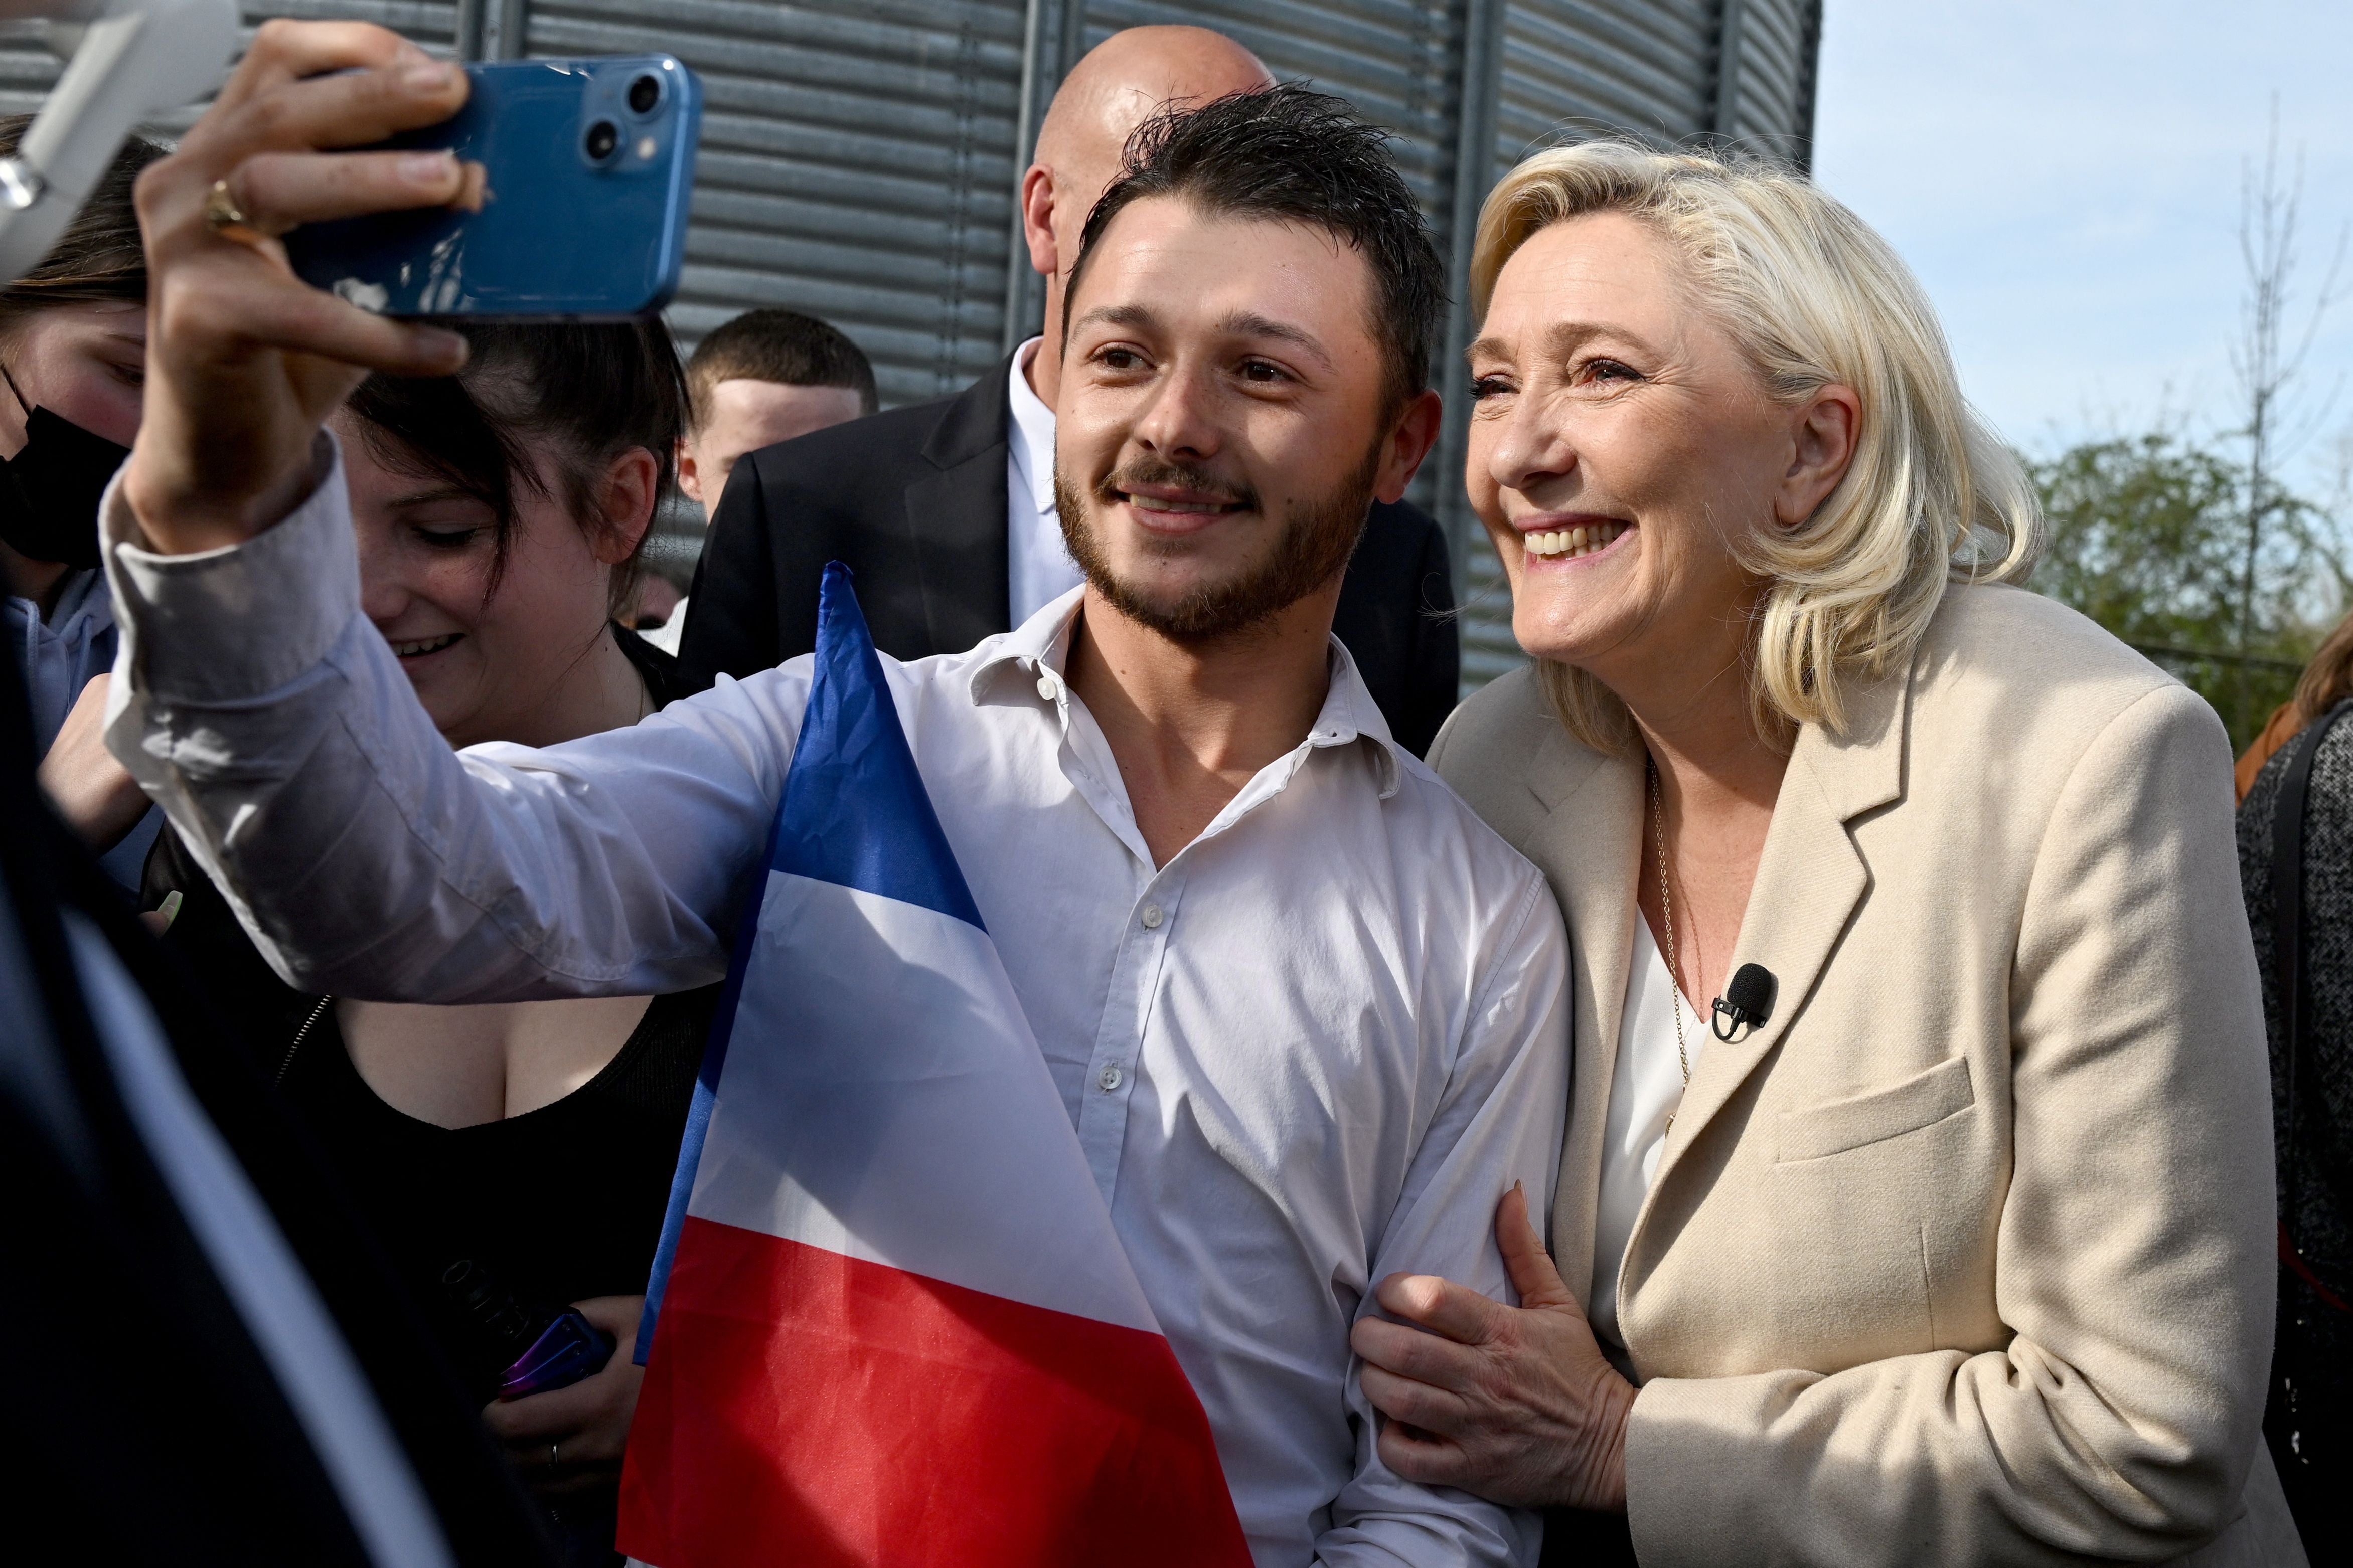 Marine Le Pen poses for a picture with a supporter during a visit at a grain farm Soucy, Burgundy, 11 April